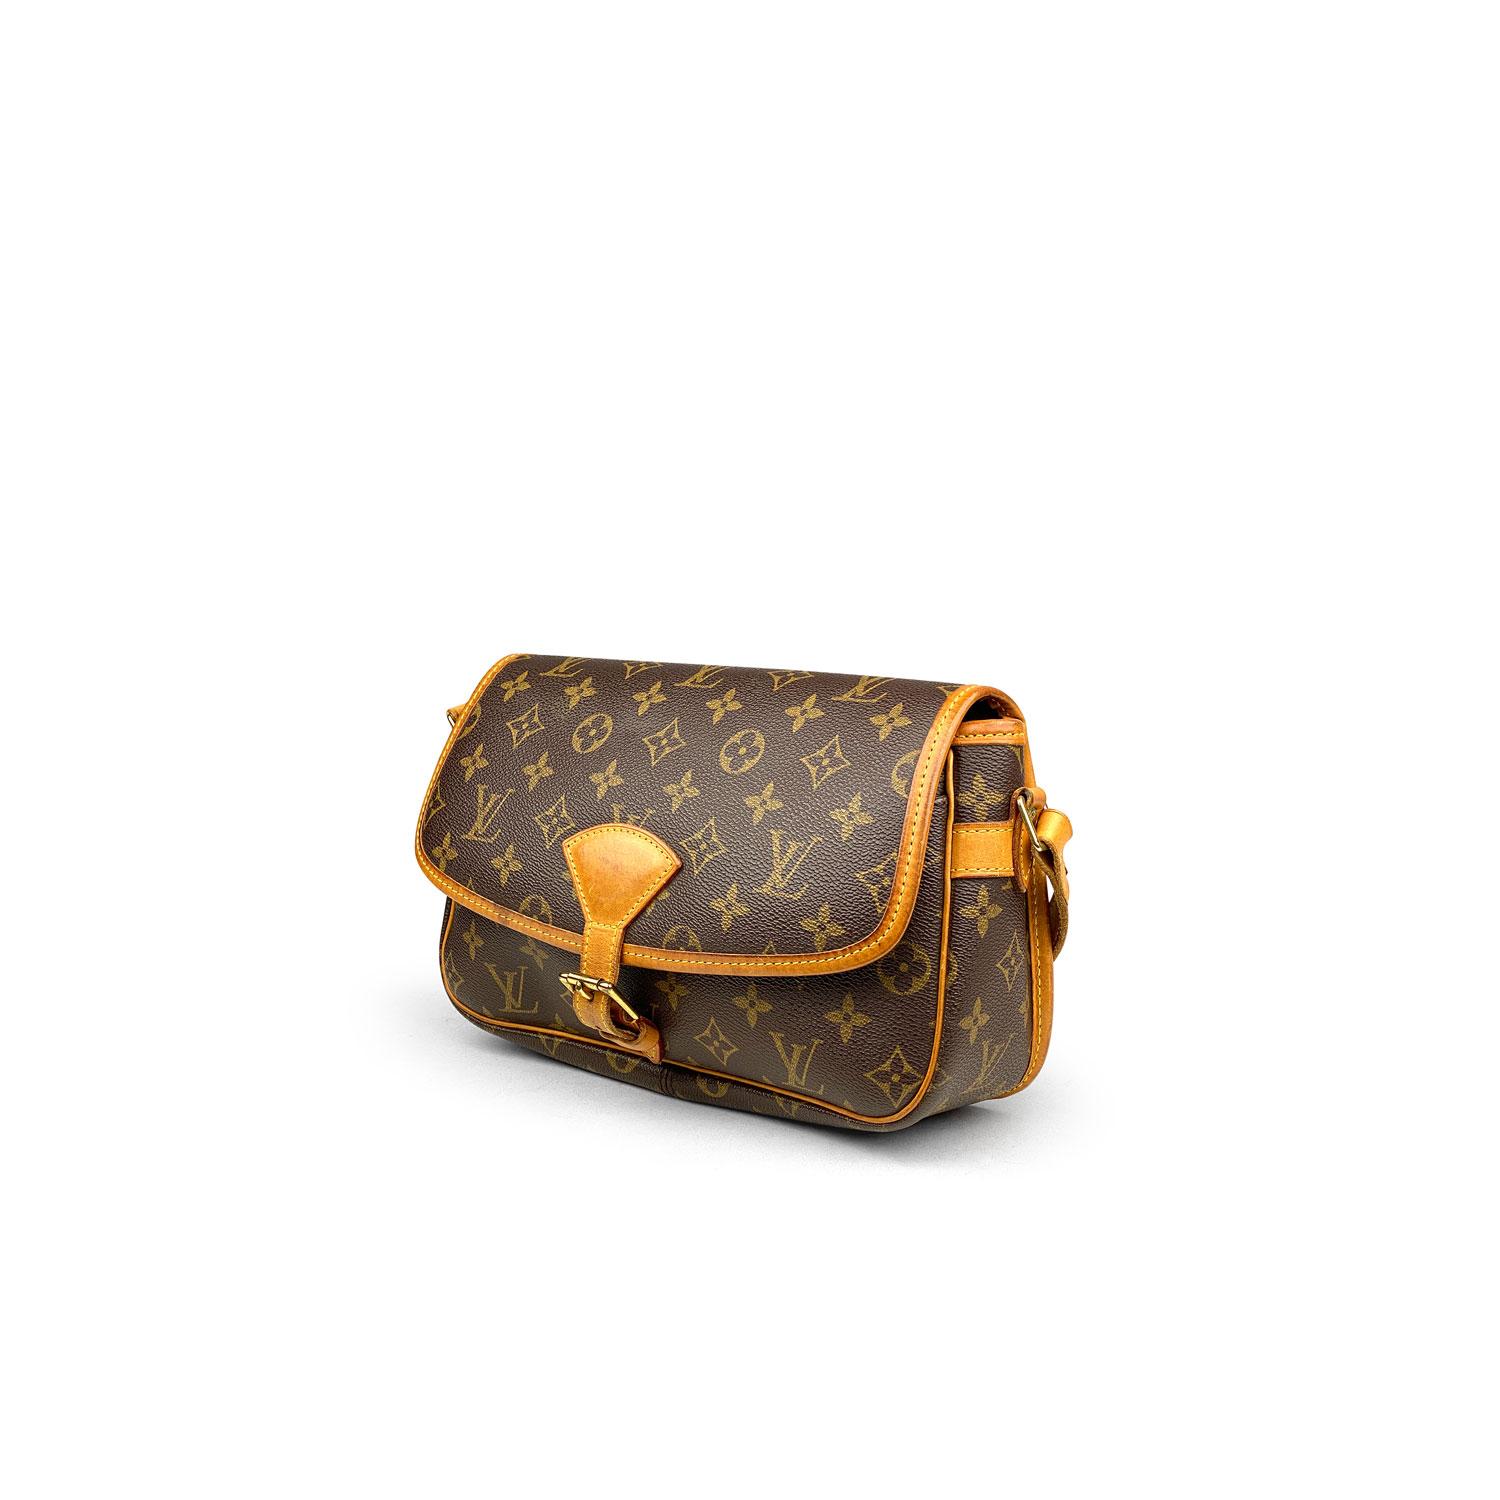 Brown and tan monogram coated canvas Louis Vuitton Sologne bag with

– Brass hardware
– Tan vachetta leather trim
– Single adjustable flat shoulder strap
– Single slit pocket at back, single slit pocket under front flap, brown canvas lining, single